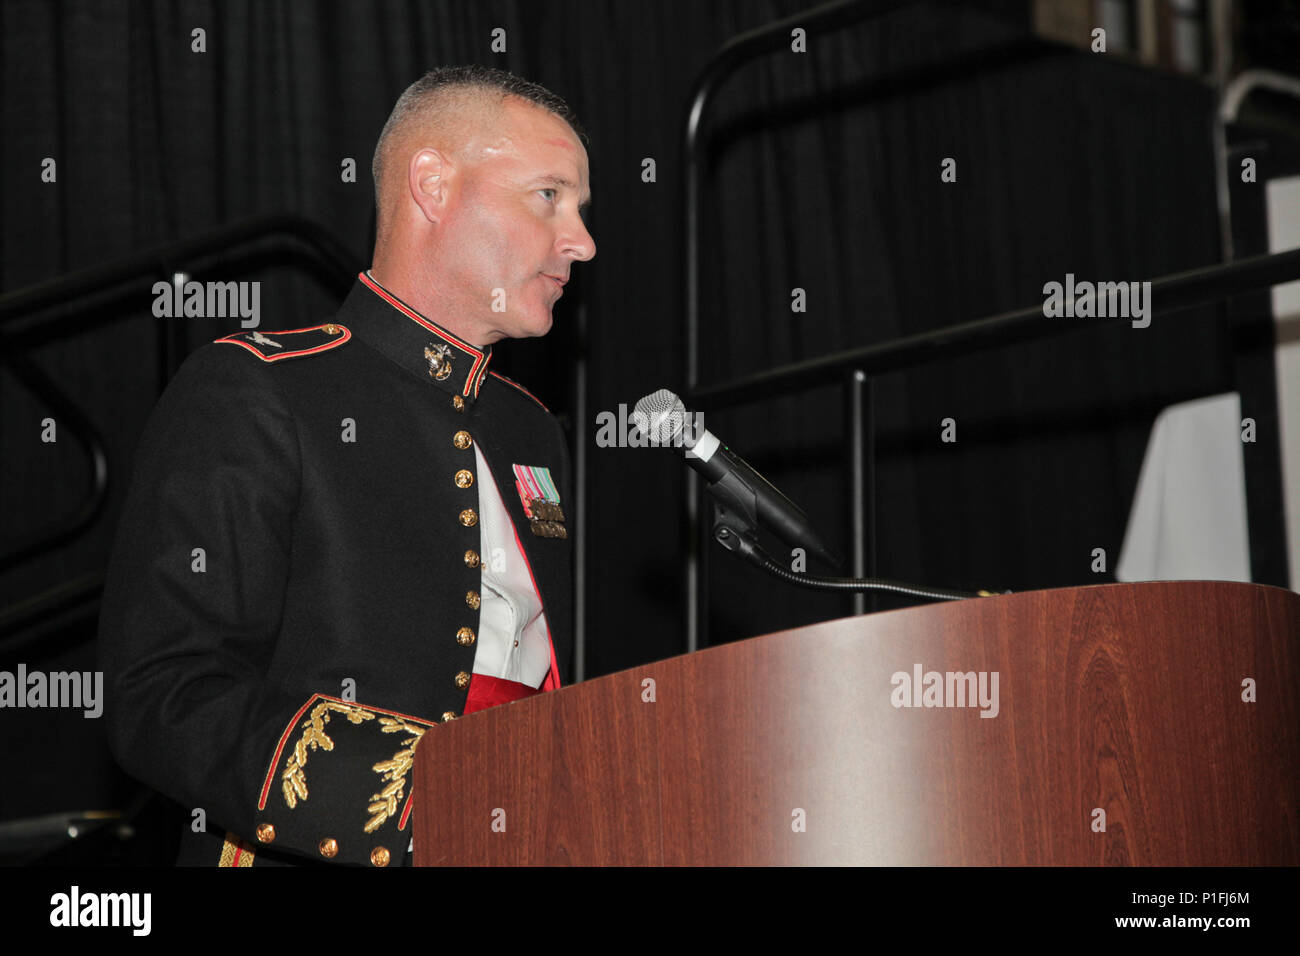 U.S. Marine Corps Col. David P. Grant, commanding officer of Marine Corps Combat Service Support Schools (MCCSSS), addresses guests during the student Marine Corps birthday ball ceremony held at Camp Lejeune, N.C., Oct. 29, 2016. Students from Financial Management School, Ground Supply School, Personnel Administration School, and Logistics Operations School attended their first Marine Corps Ball to celebrate the 241st Marine Corps Birthday. (U.S. Marine Corps photo by Lance Cpl. Jose D. Villalobosrocha) Stock Photo